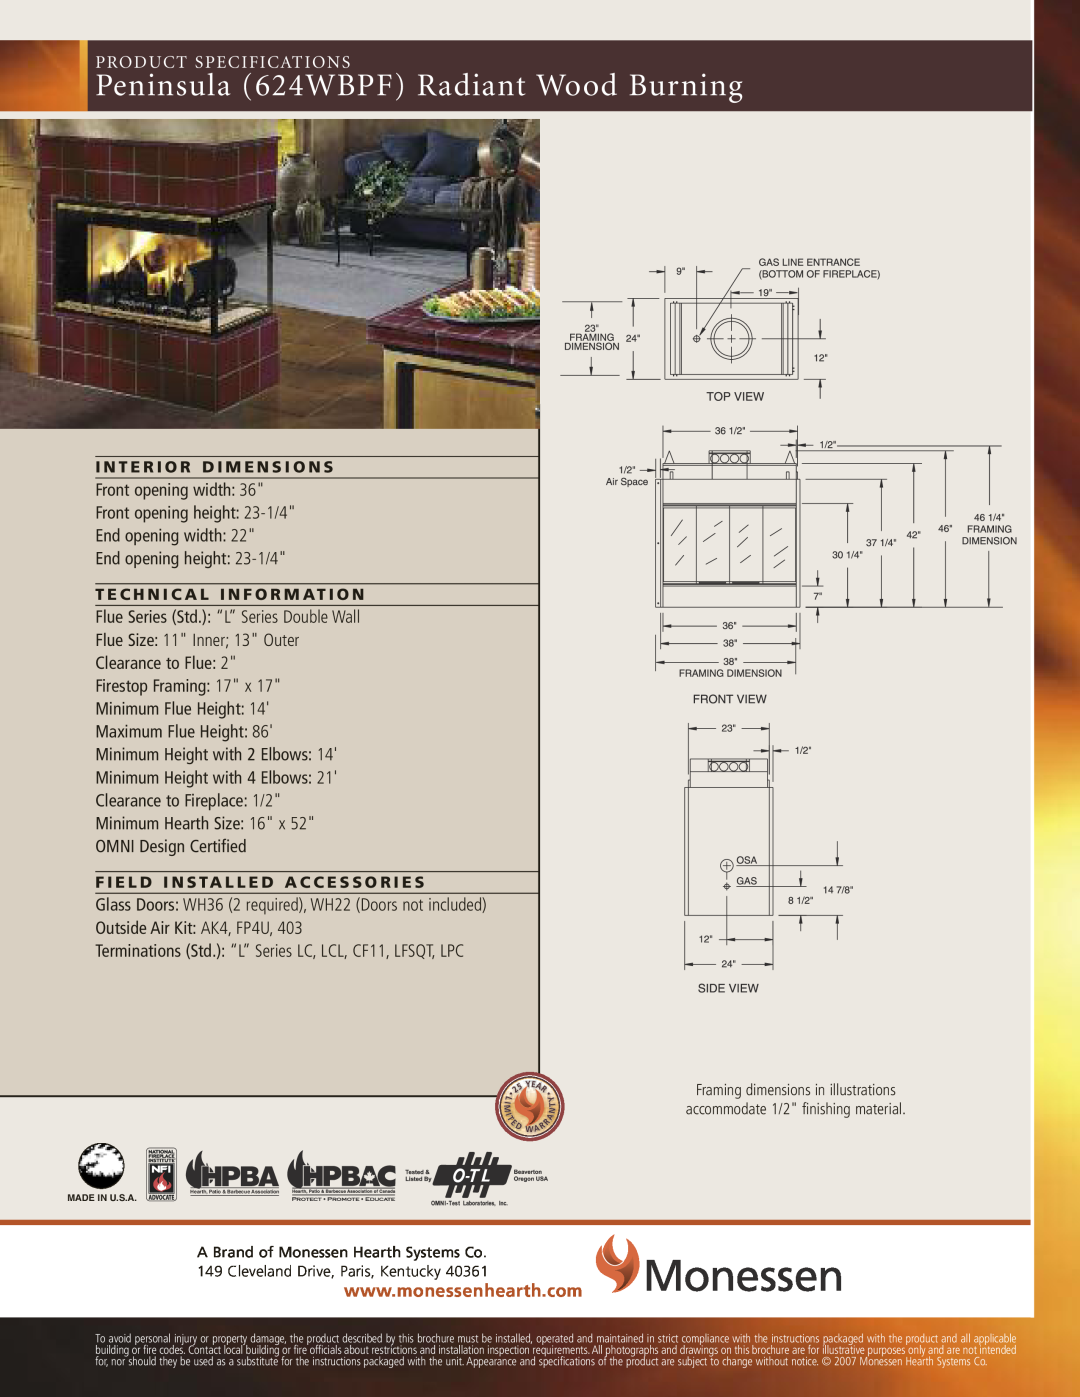 Monessen Hearth brochure Peninsula 624WBPF Radiant Wood Burning, Hpba, Product Specifications, Made In U.S.A 